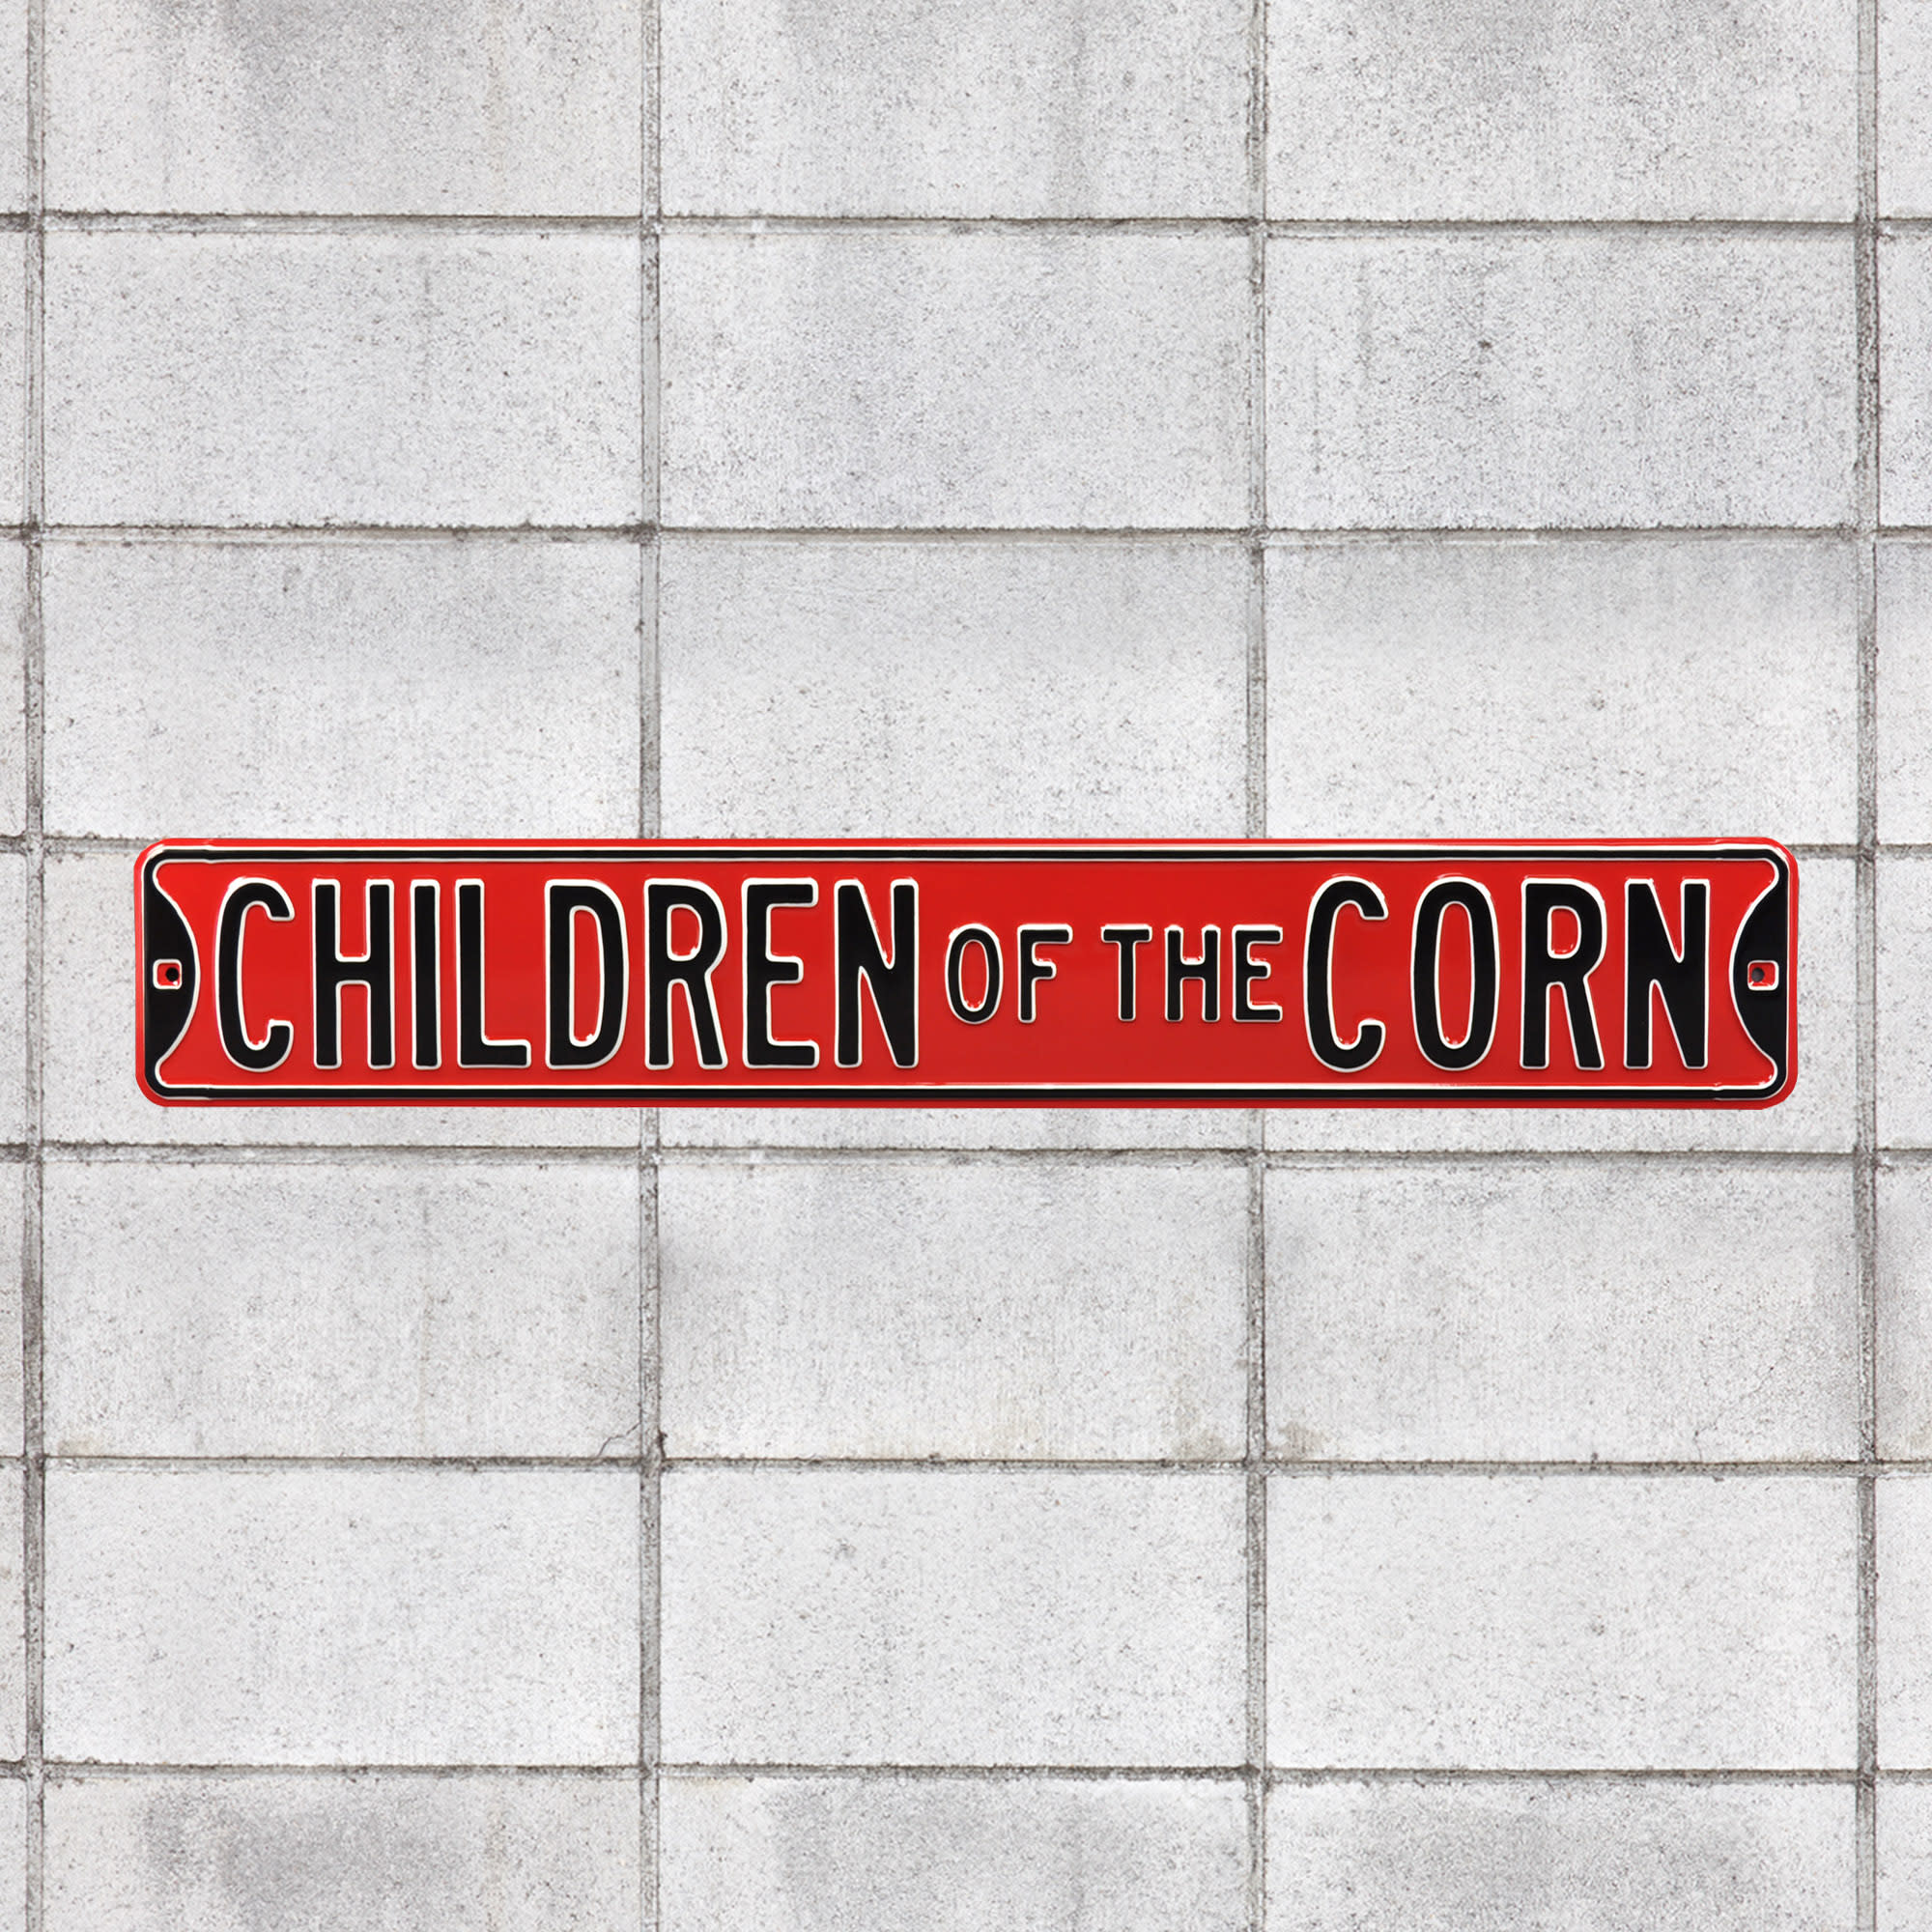 Nebraska Cornhuskers: Children of the Corn - Officially Licensed Metal Street Sign 36.0"W x 6.0"H by Fathead | 100% Steel